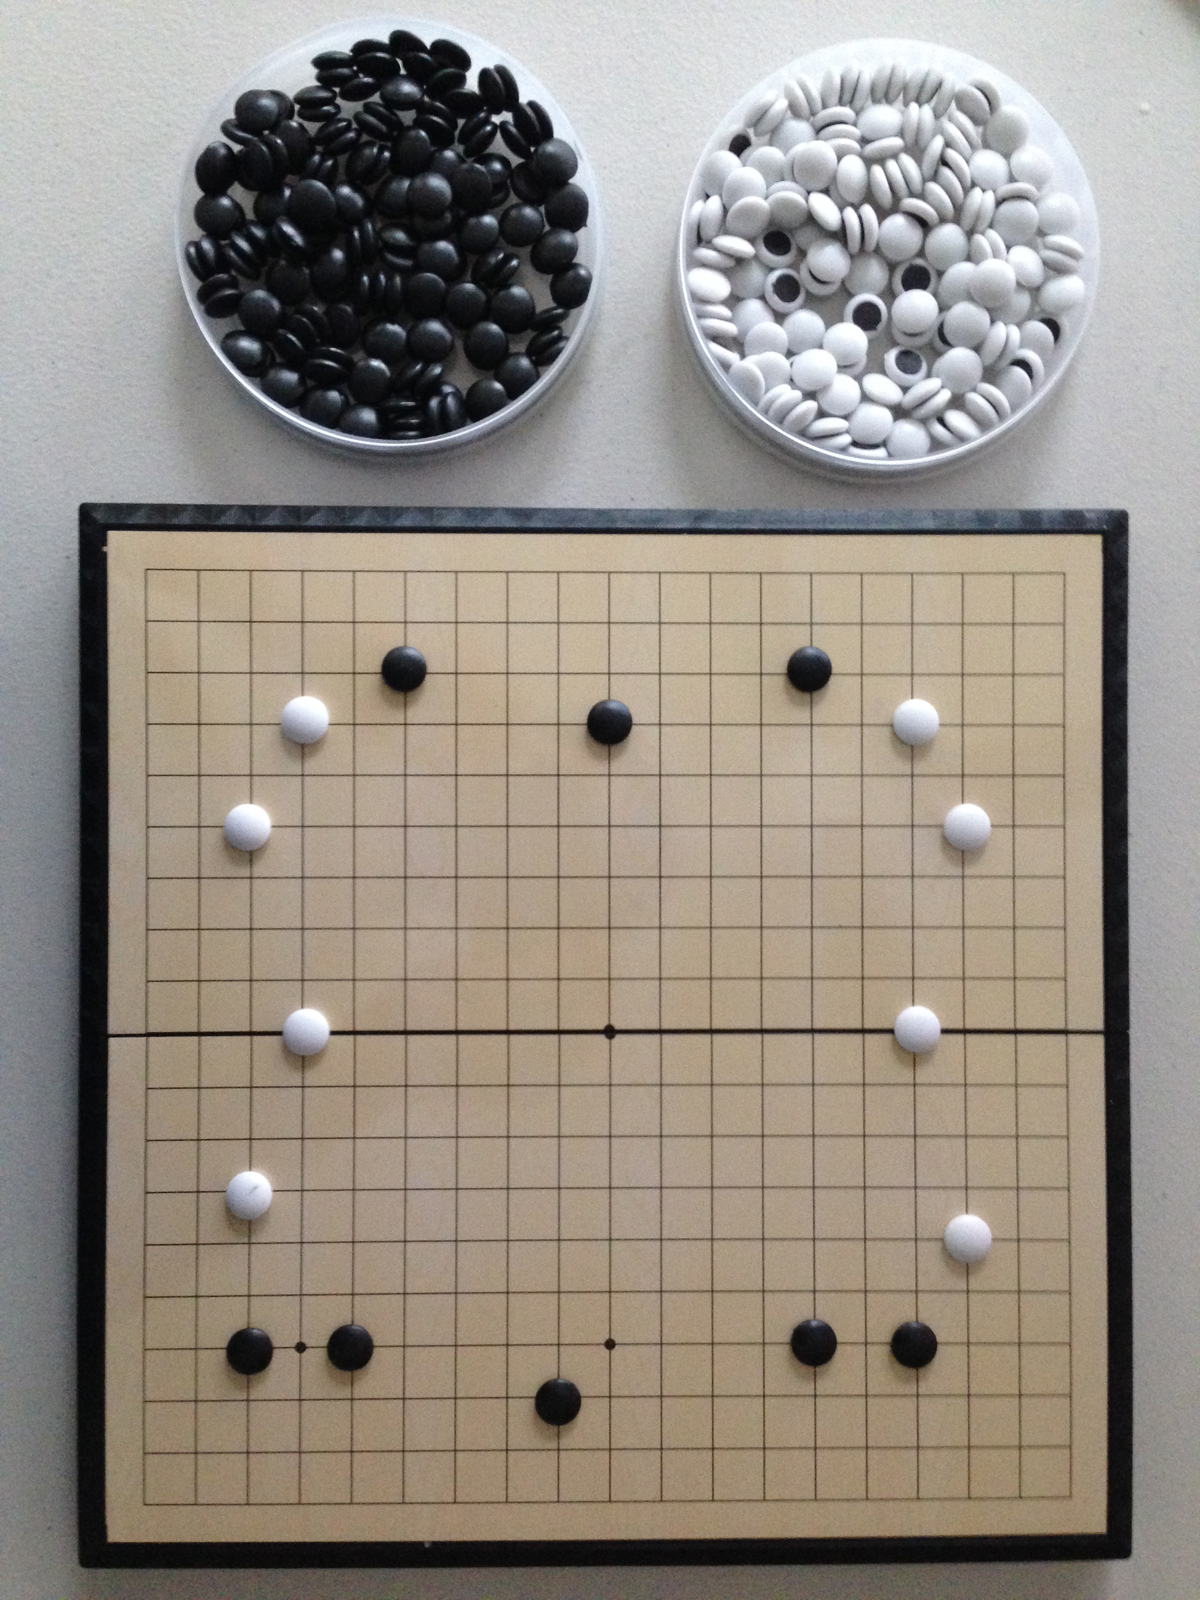 Aerial overview of the board and stones in action. And in case you're wondering, this is the best magnetic go set I've used to date (excluding the YMImports Roll-up Magnetic Board because that is different from this kind of magnetic set).